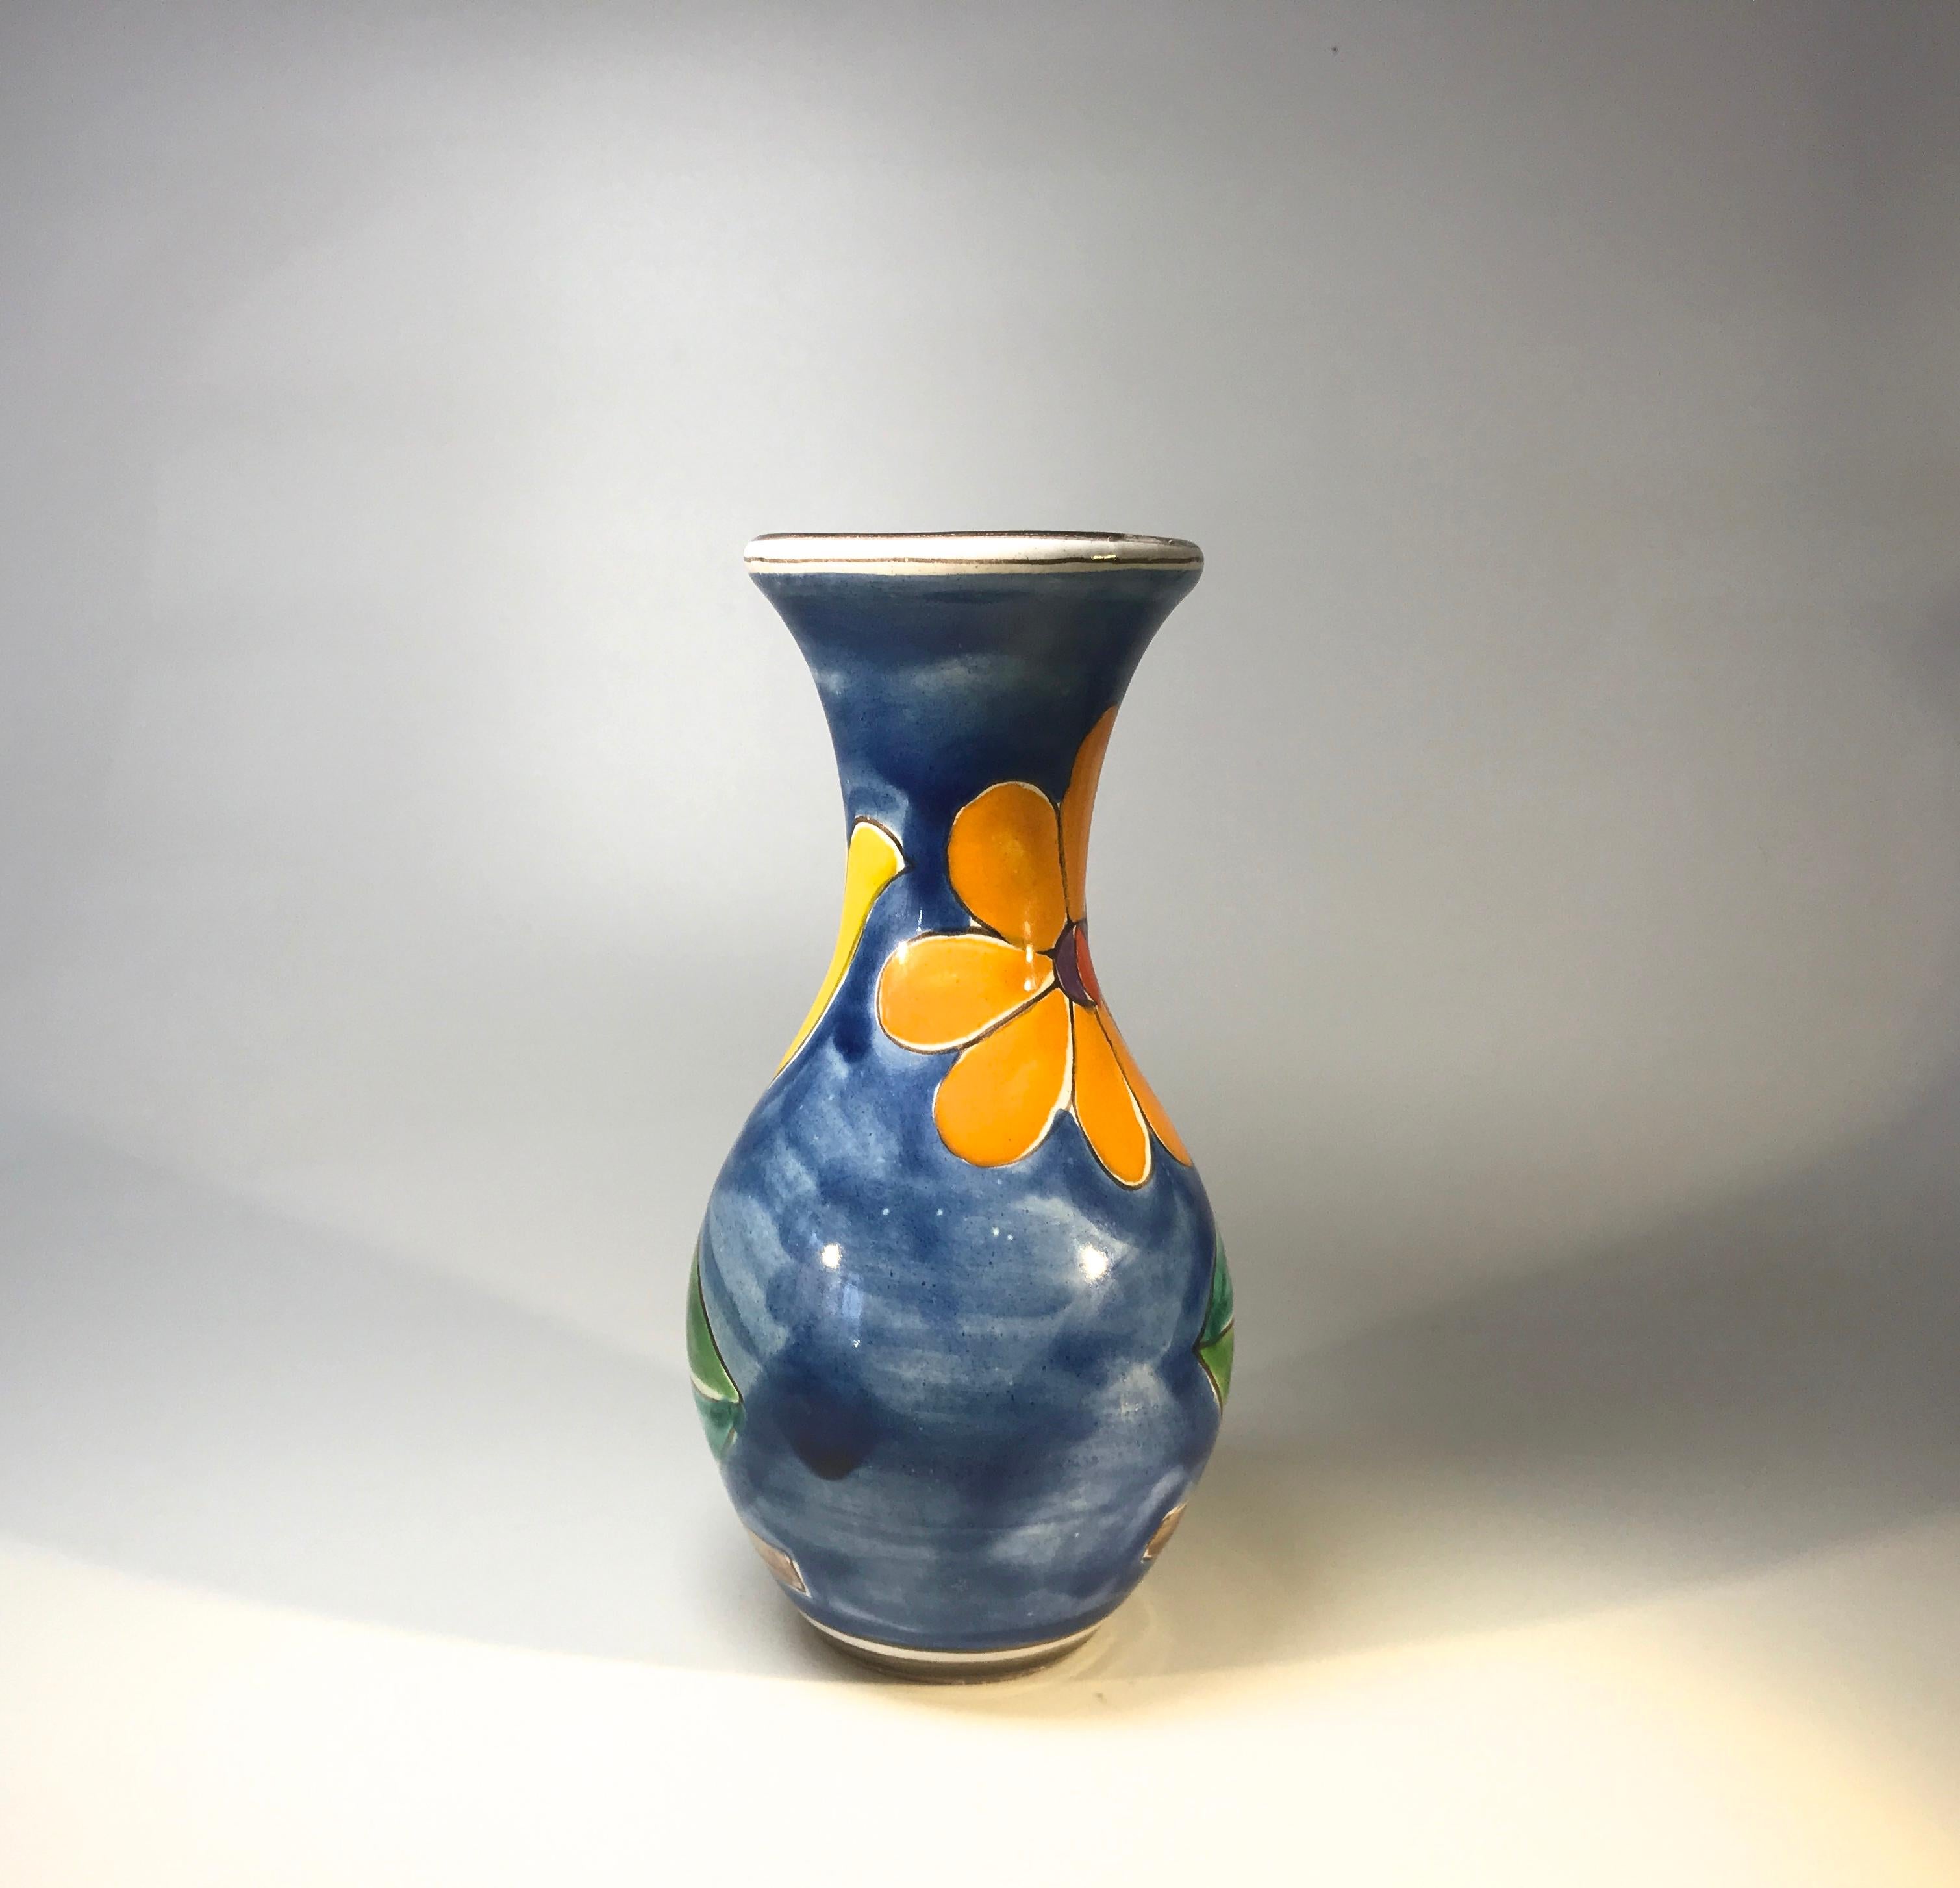 DeSimone of Italy, tall shaped ceramic vase hand decorated with brightly colored orange and yellow flowers
A delightfully cheerful vase from DeSimone,
Circa 1960s
Signed DeSimone, Italy
Measures: Height 7 inch, diameter 3.5 inch
Very good condition